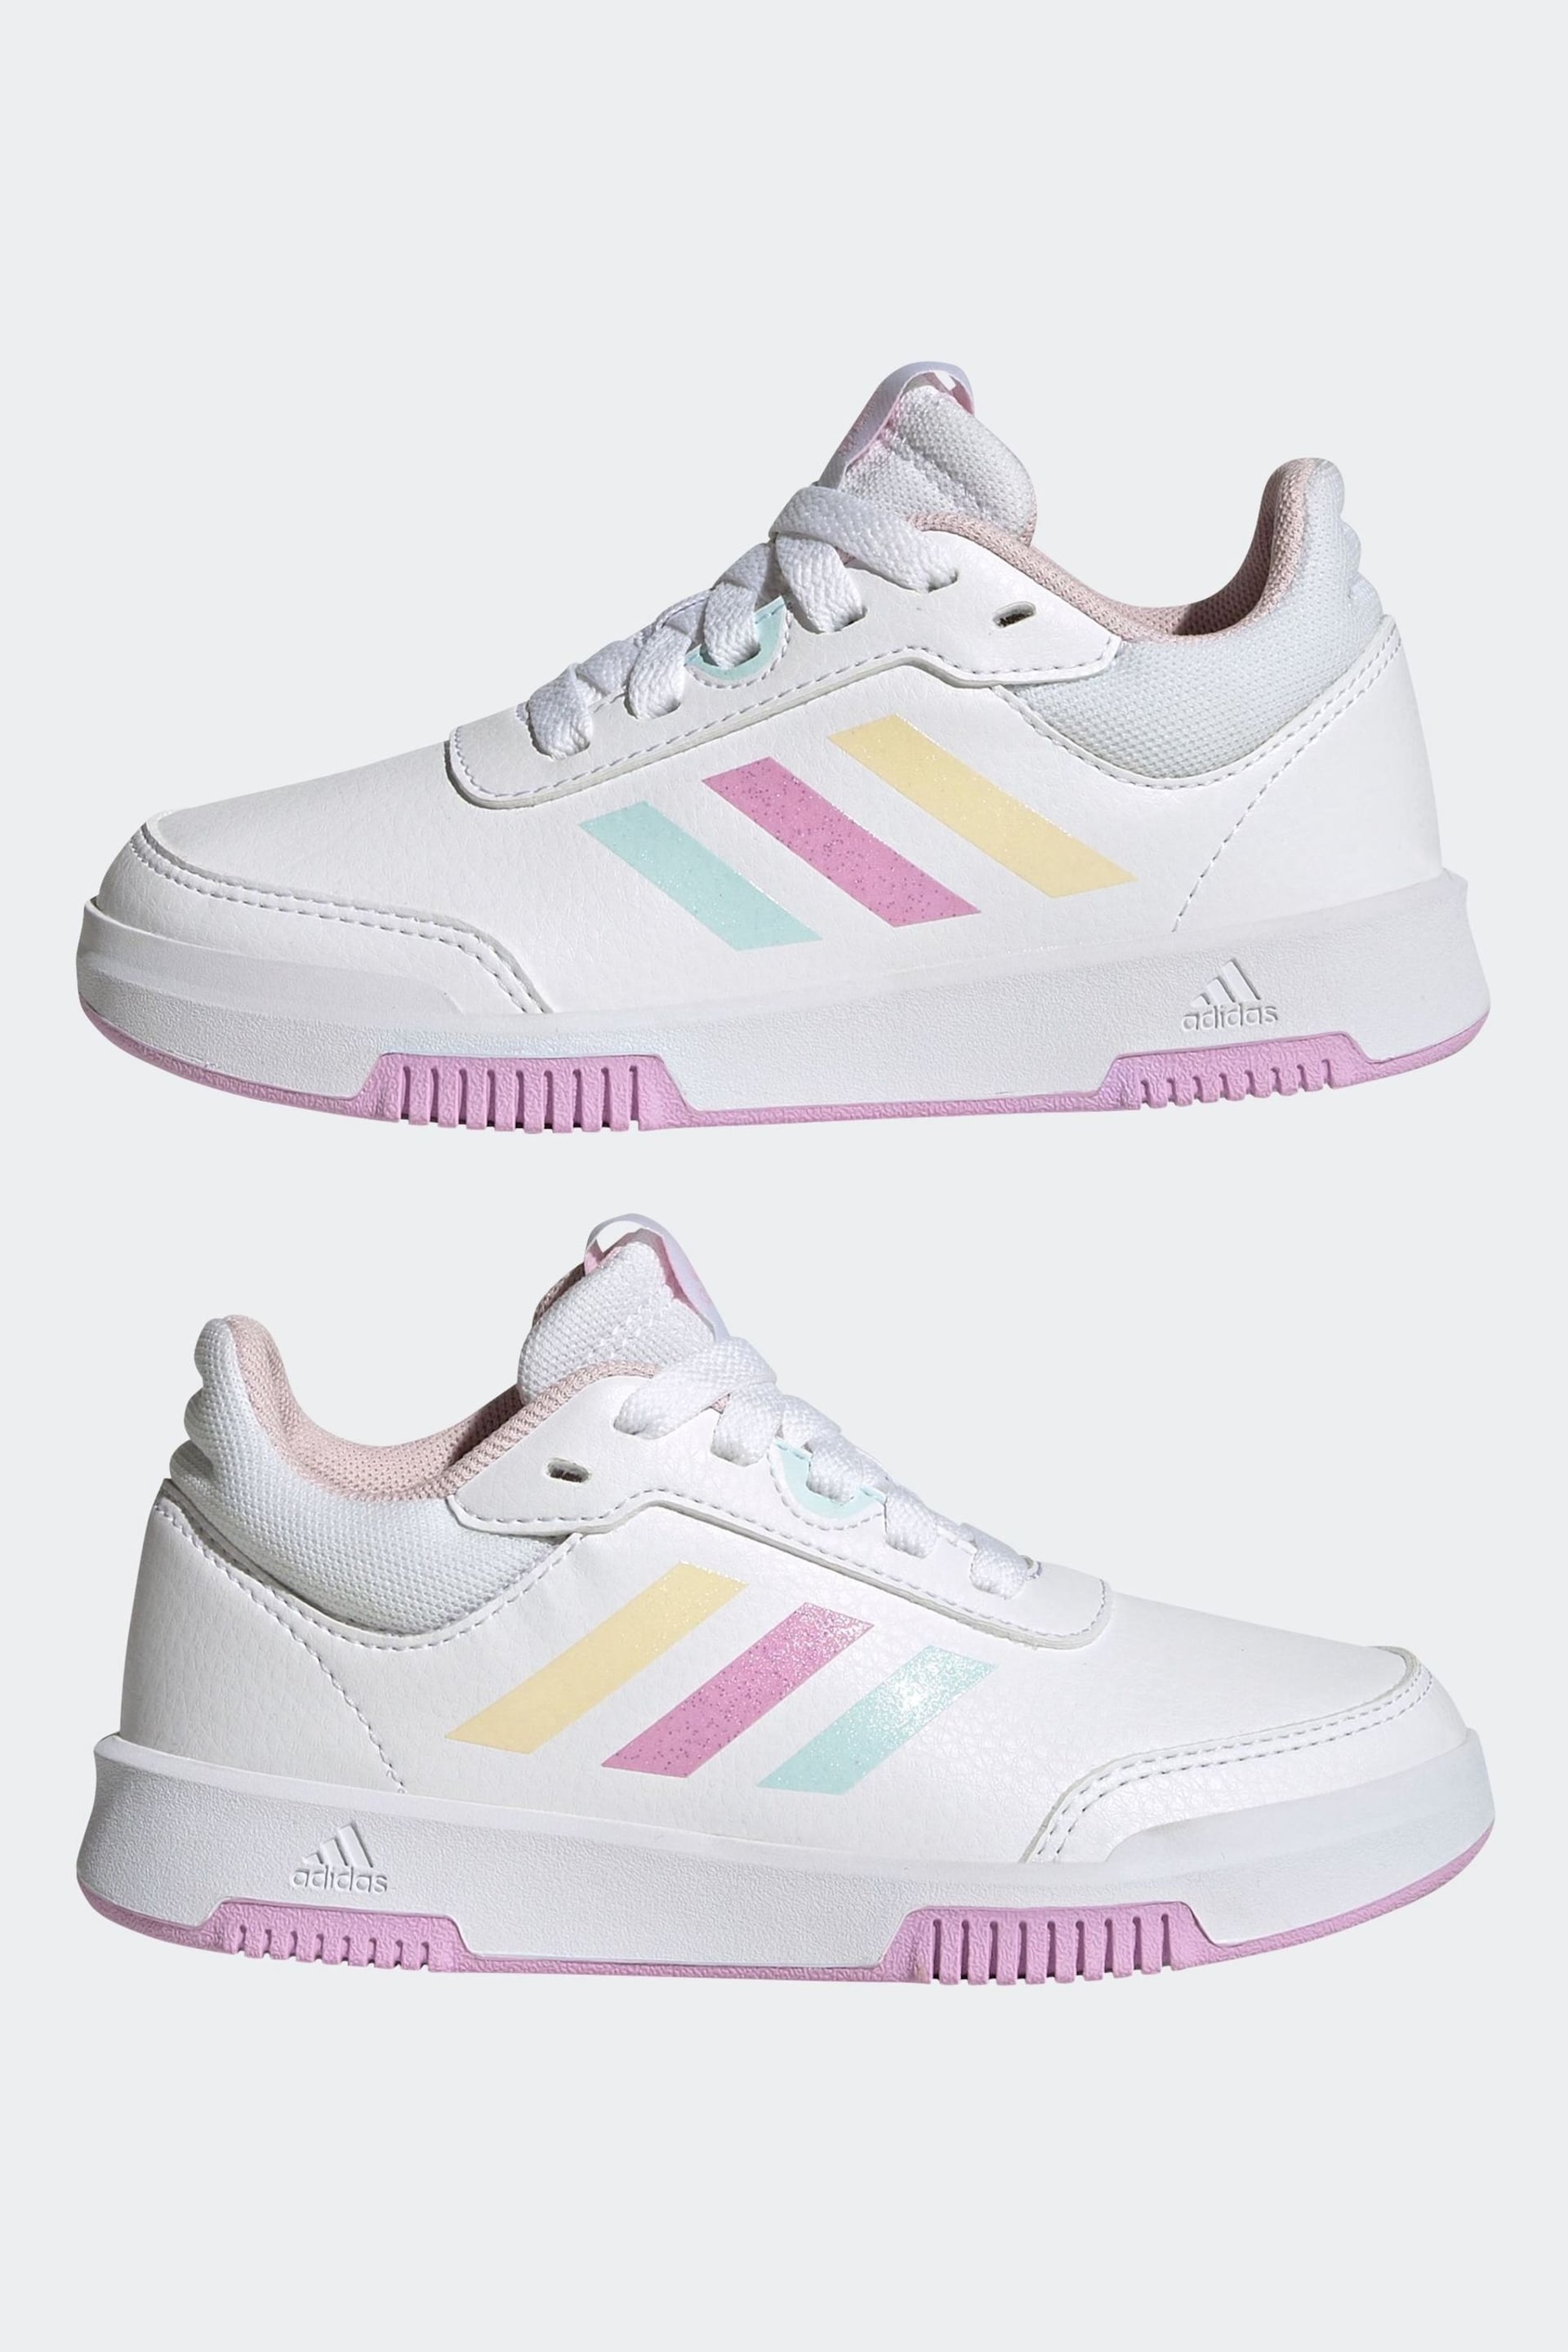 adidas White/Pink Tensaur Sport Training Lace Shoes - Image 5 of 9